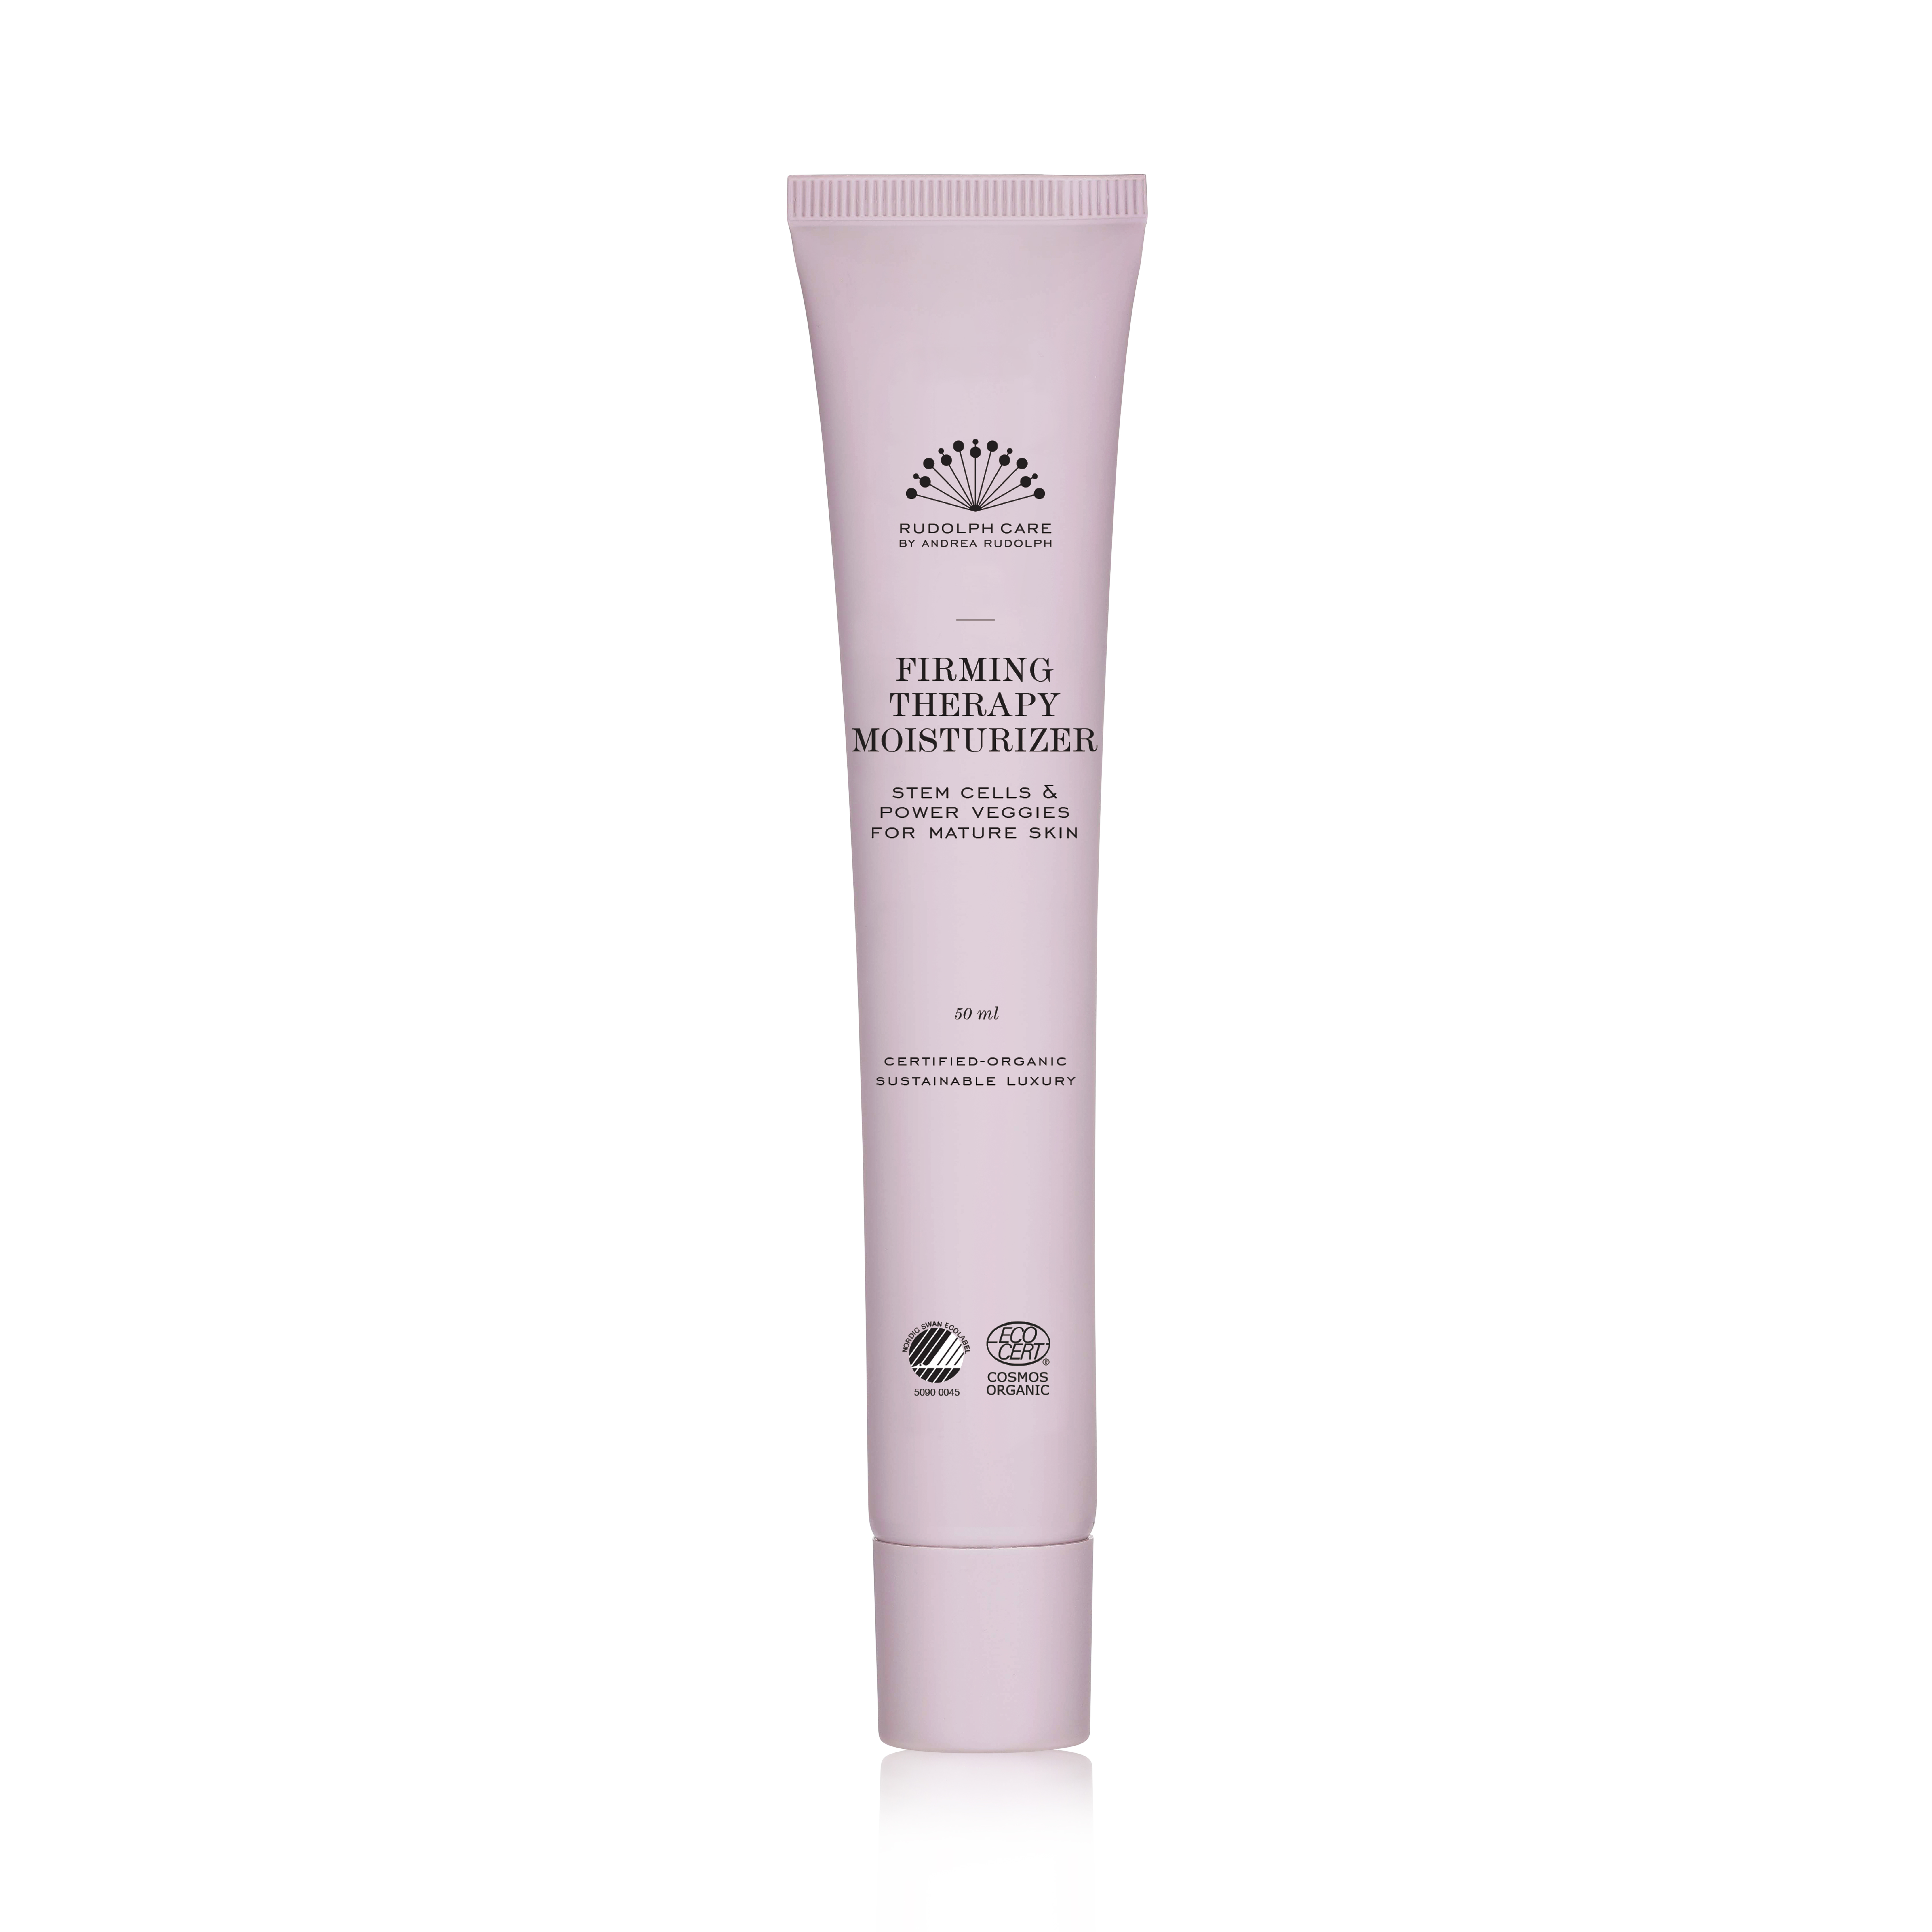 Firming Therapy Moisturizer